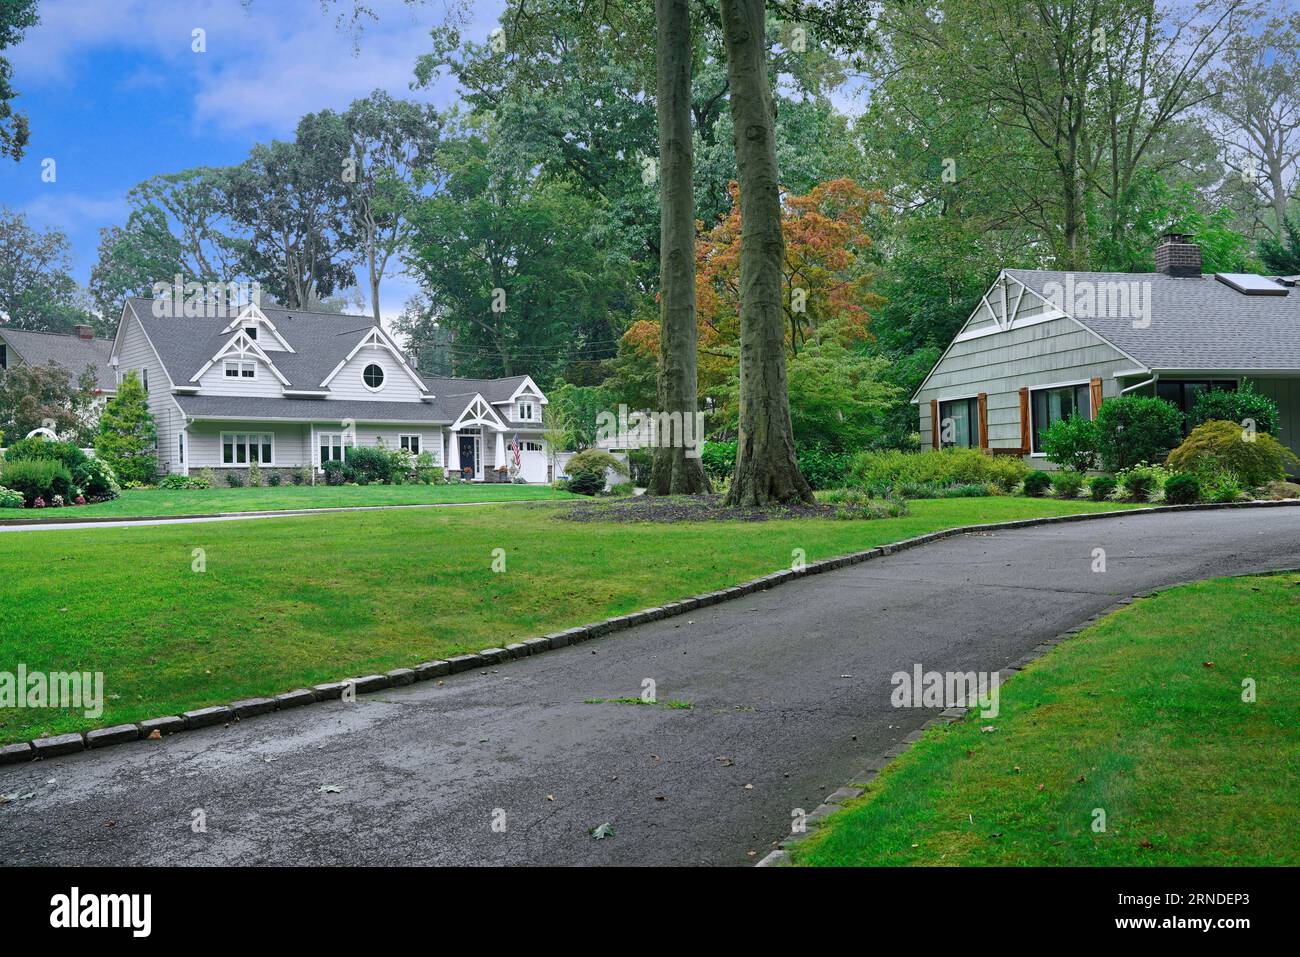 American suburban neighborhood with traditional detached houses with mature trees Stock Photo